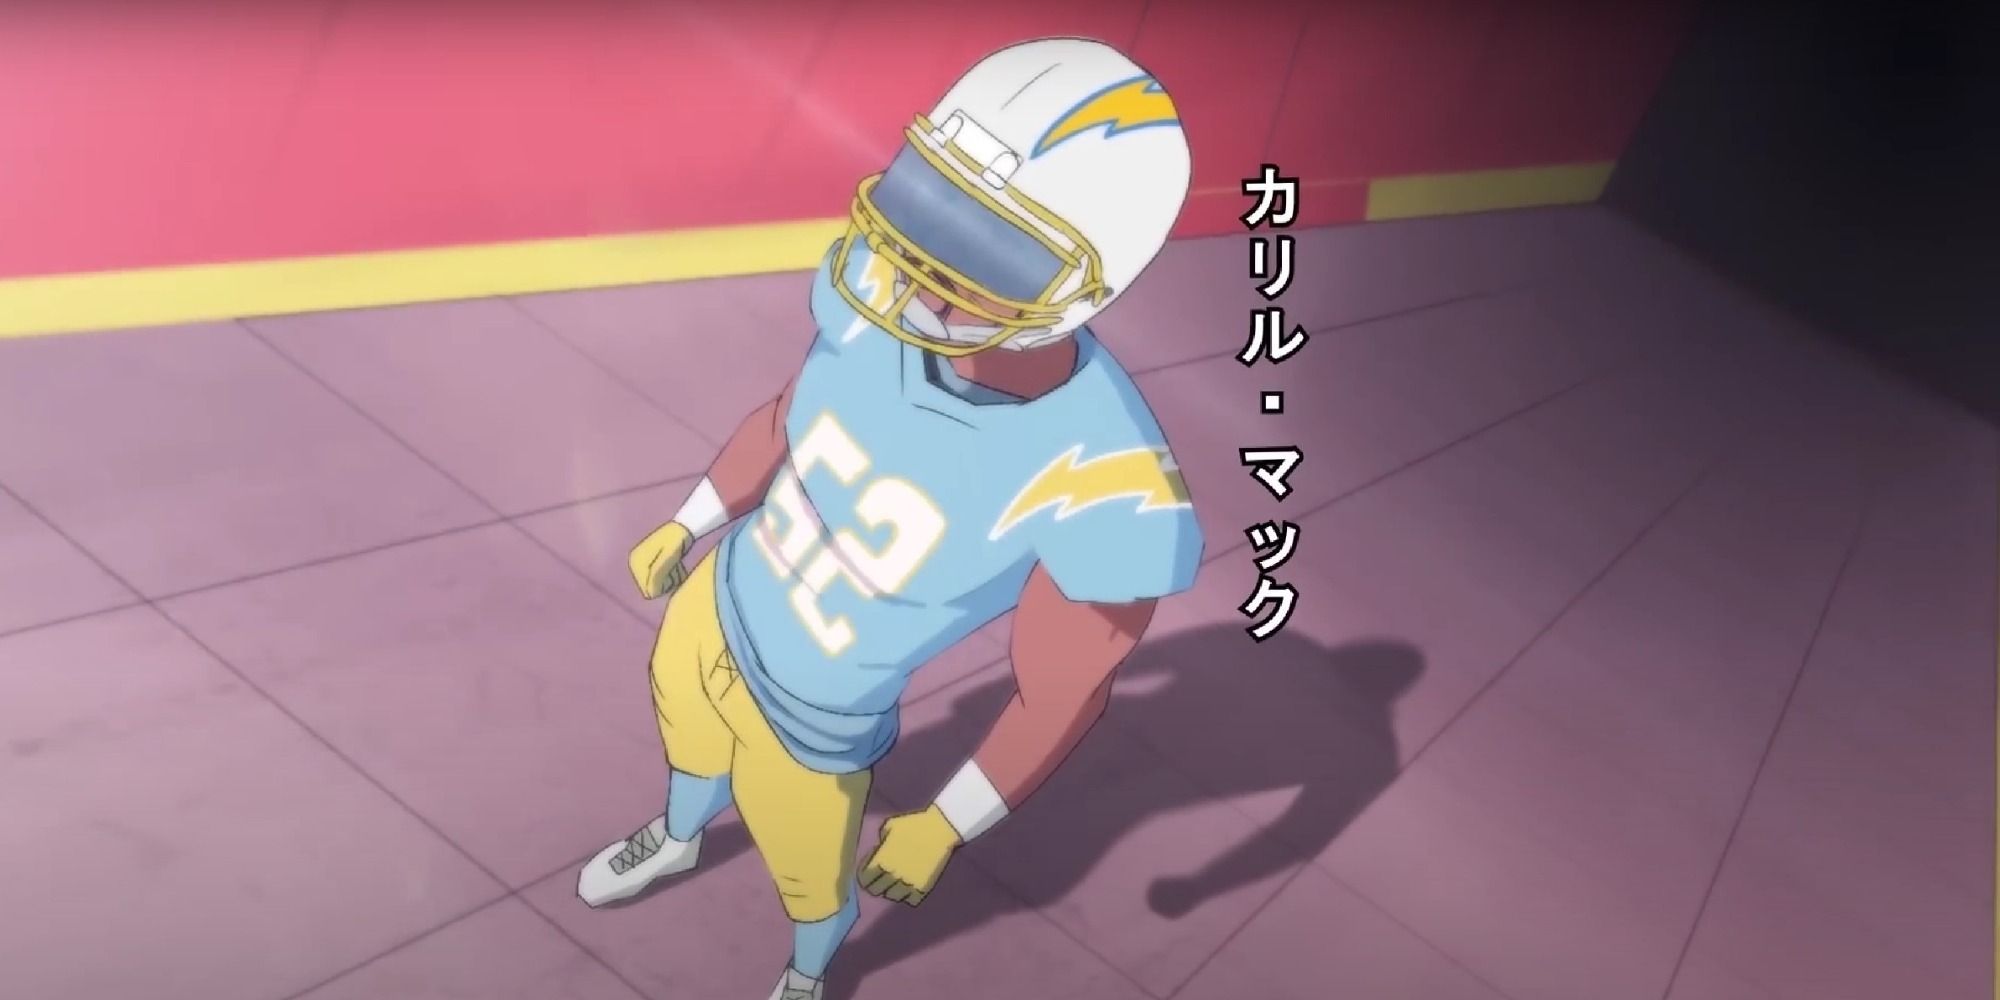 Joey Bosa's Anime Obsession - YouTube